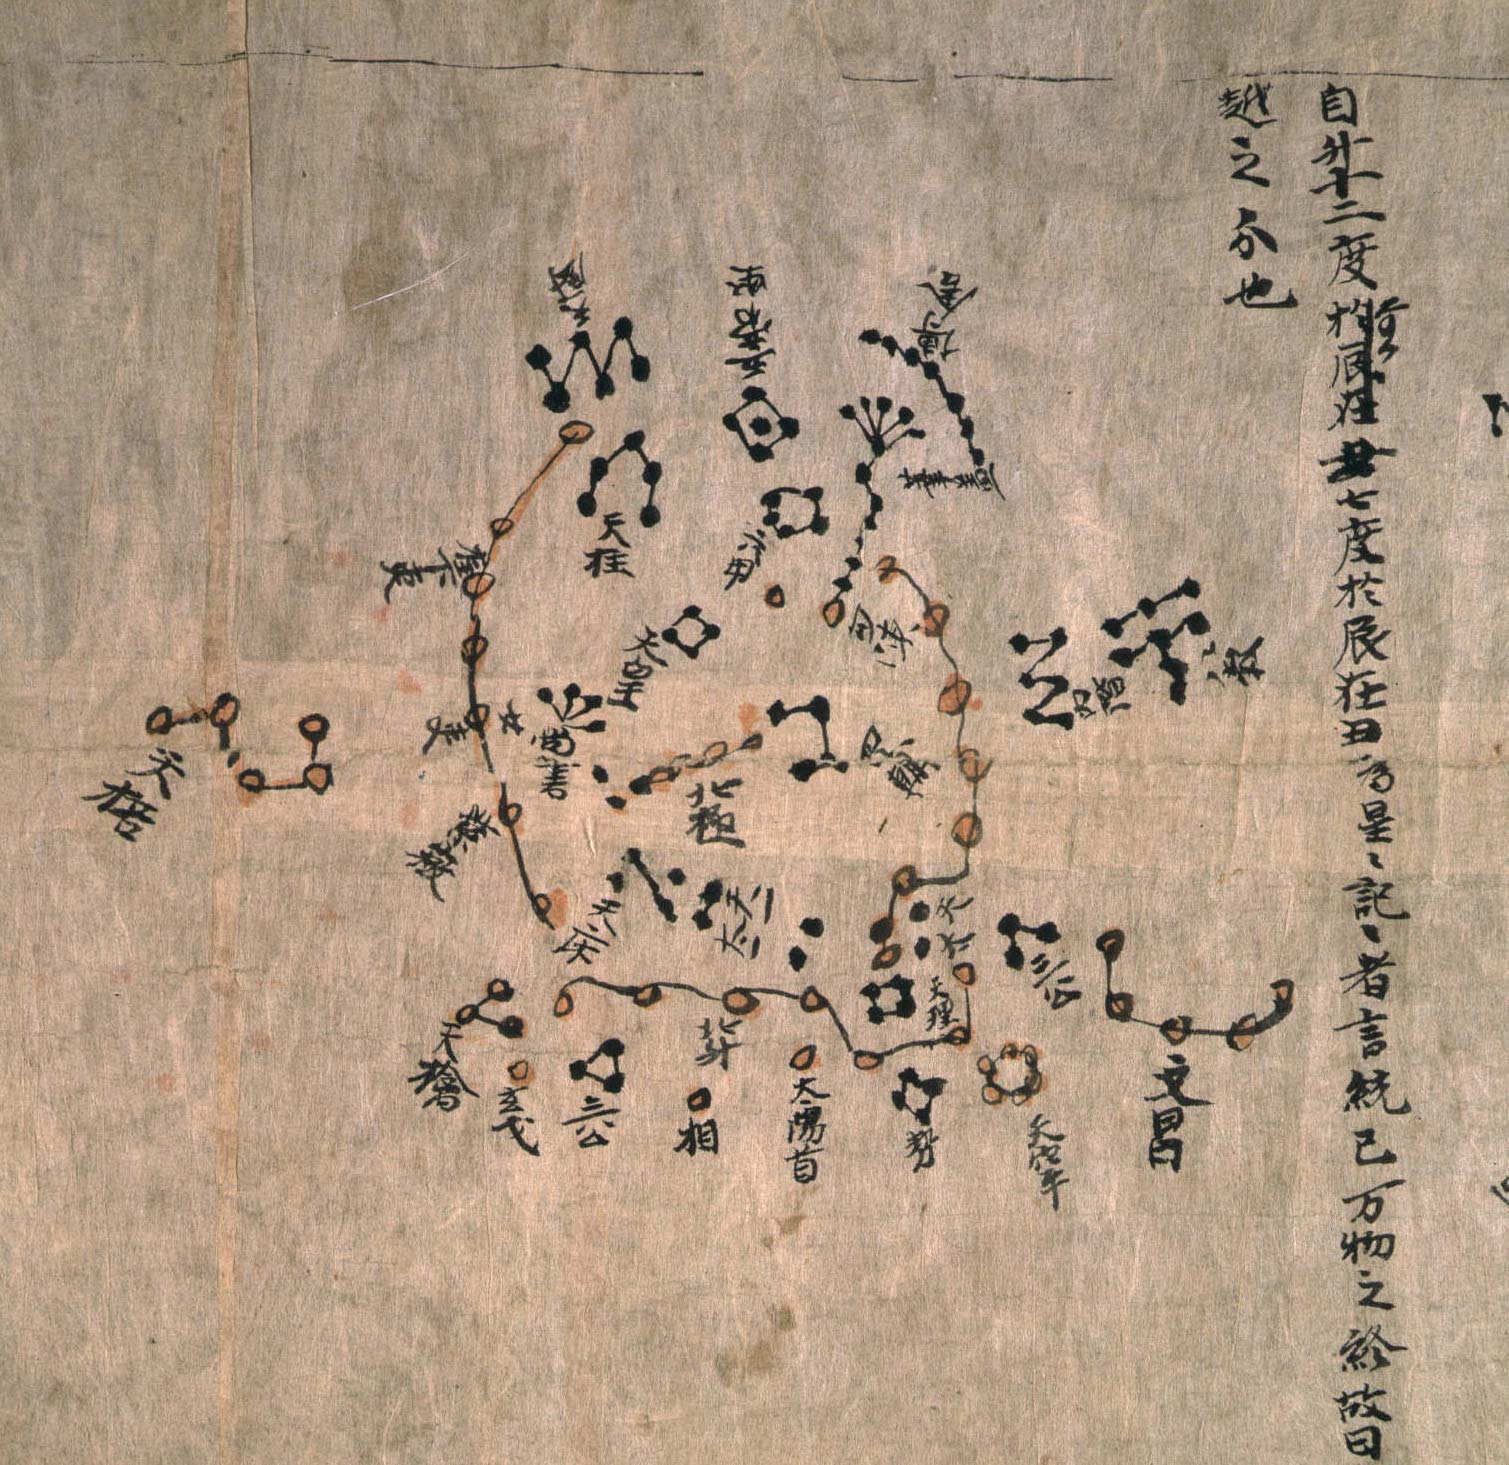 How Ancient Star Maps Gave Rise To Modern Astronomy